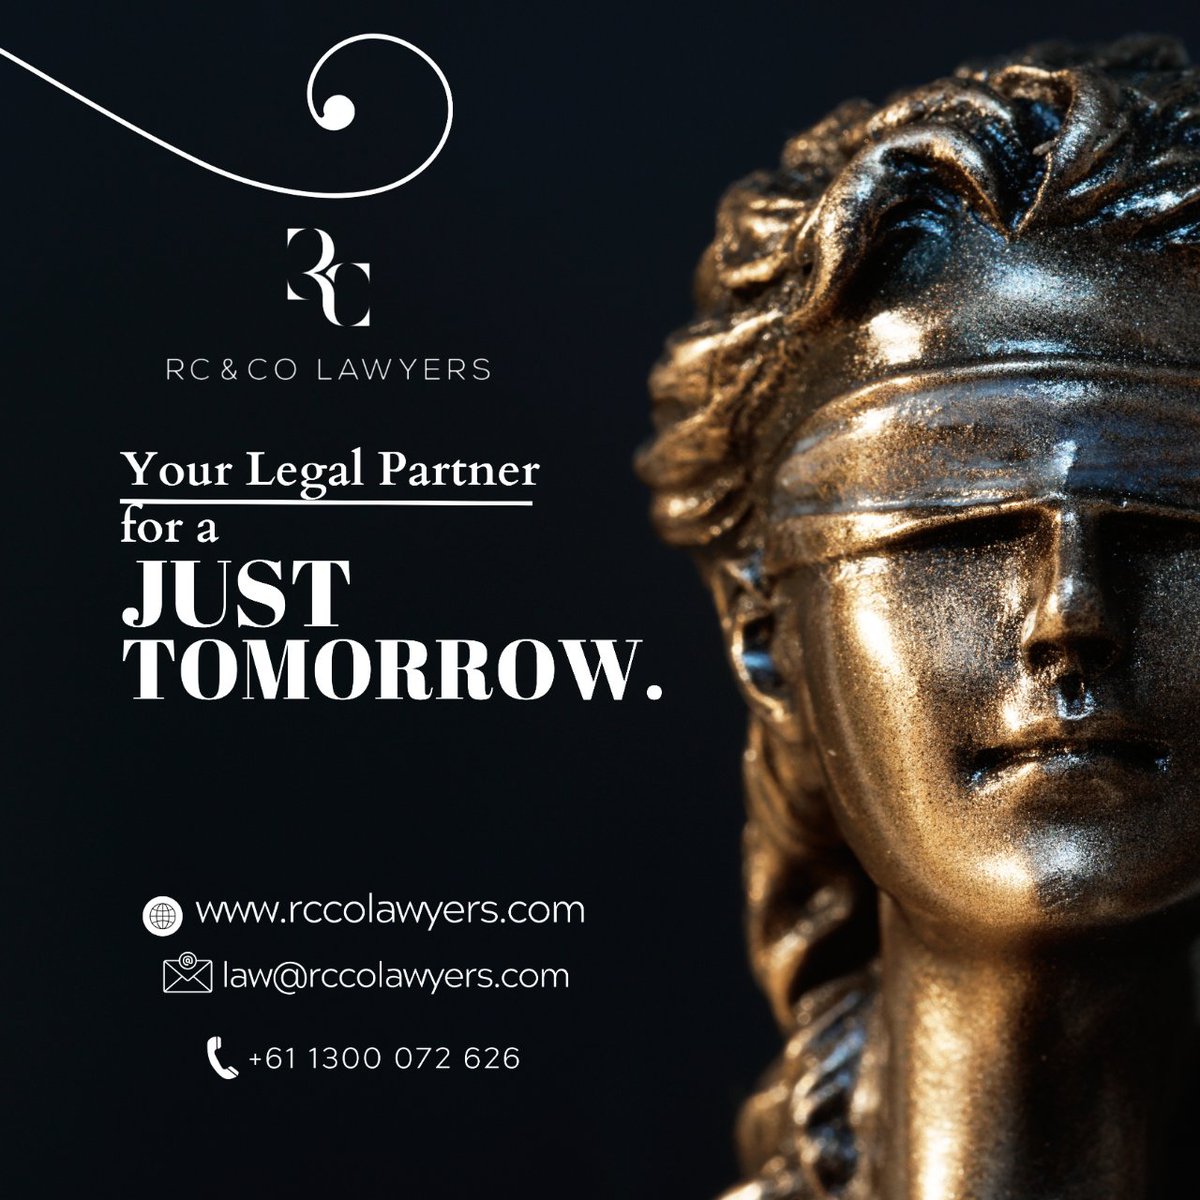 Your Trusted Legal Partner, Committed to Building a Just Tomorrow. #rccolawyers #legal #legalservices #lawfirm #australia #strata #debtcollection #conveyancing #familylaw #property #immigrationlawyer #insuranceclaims #superannuation #insolvency #immigration #litigation